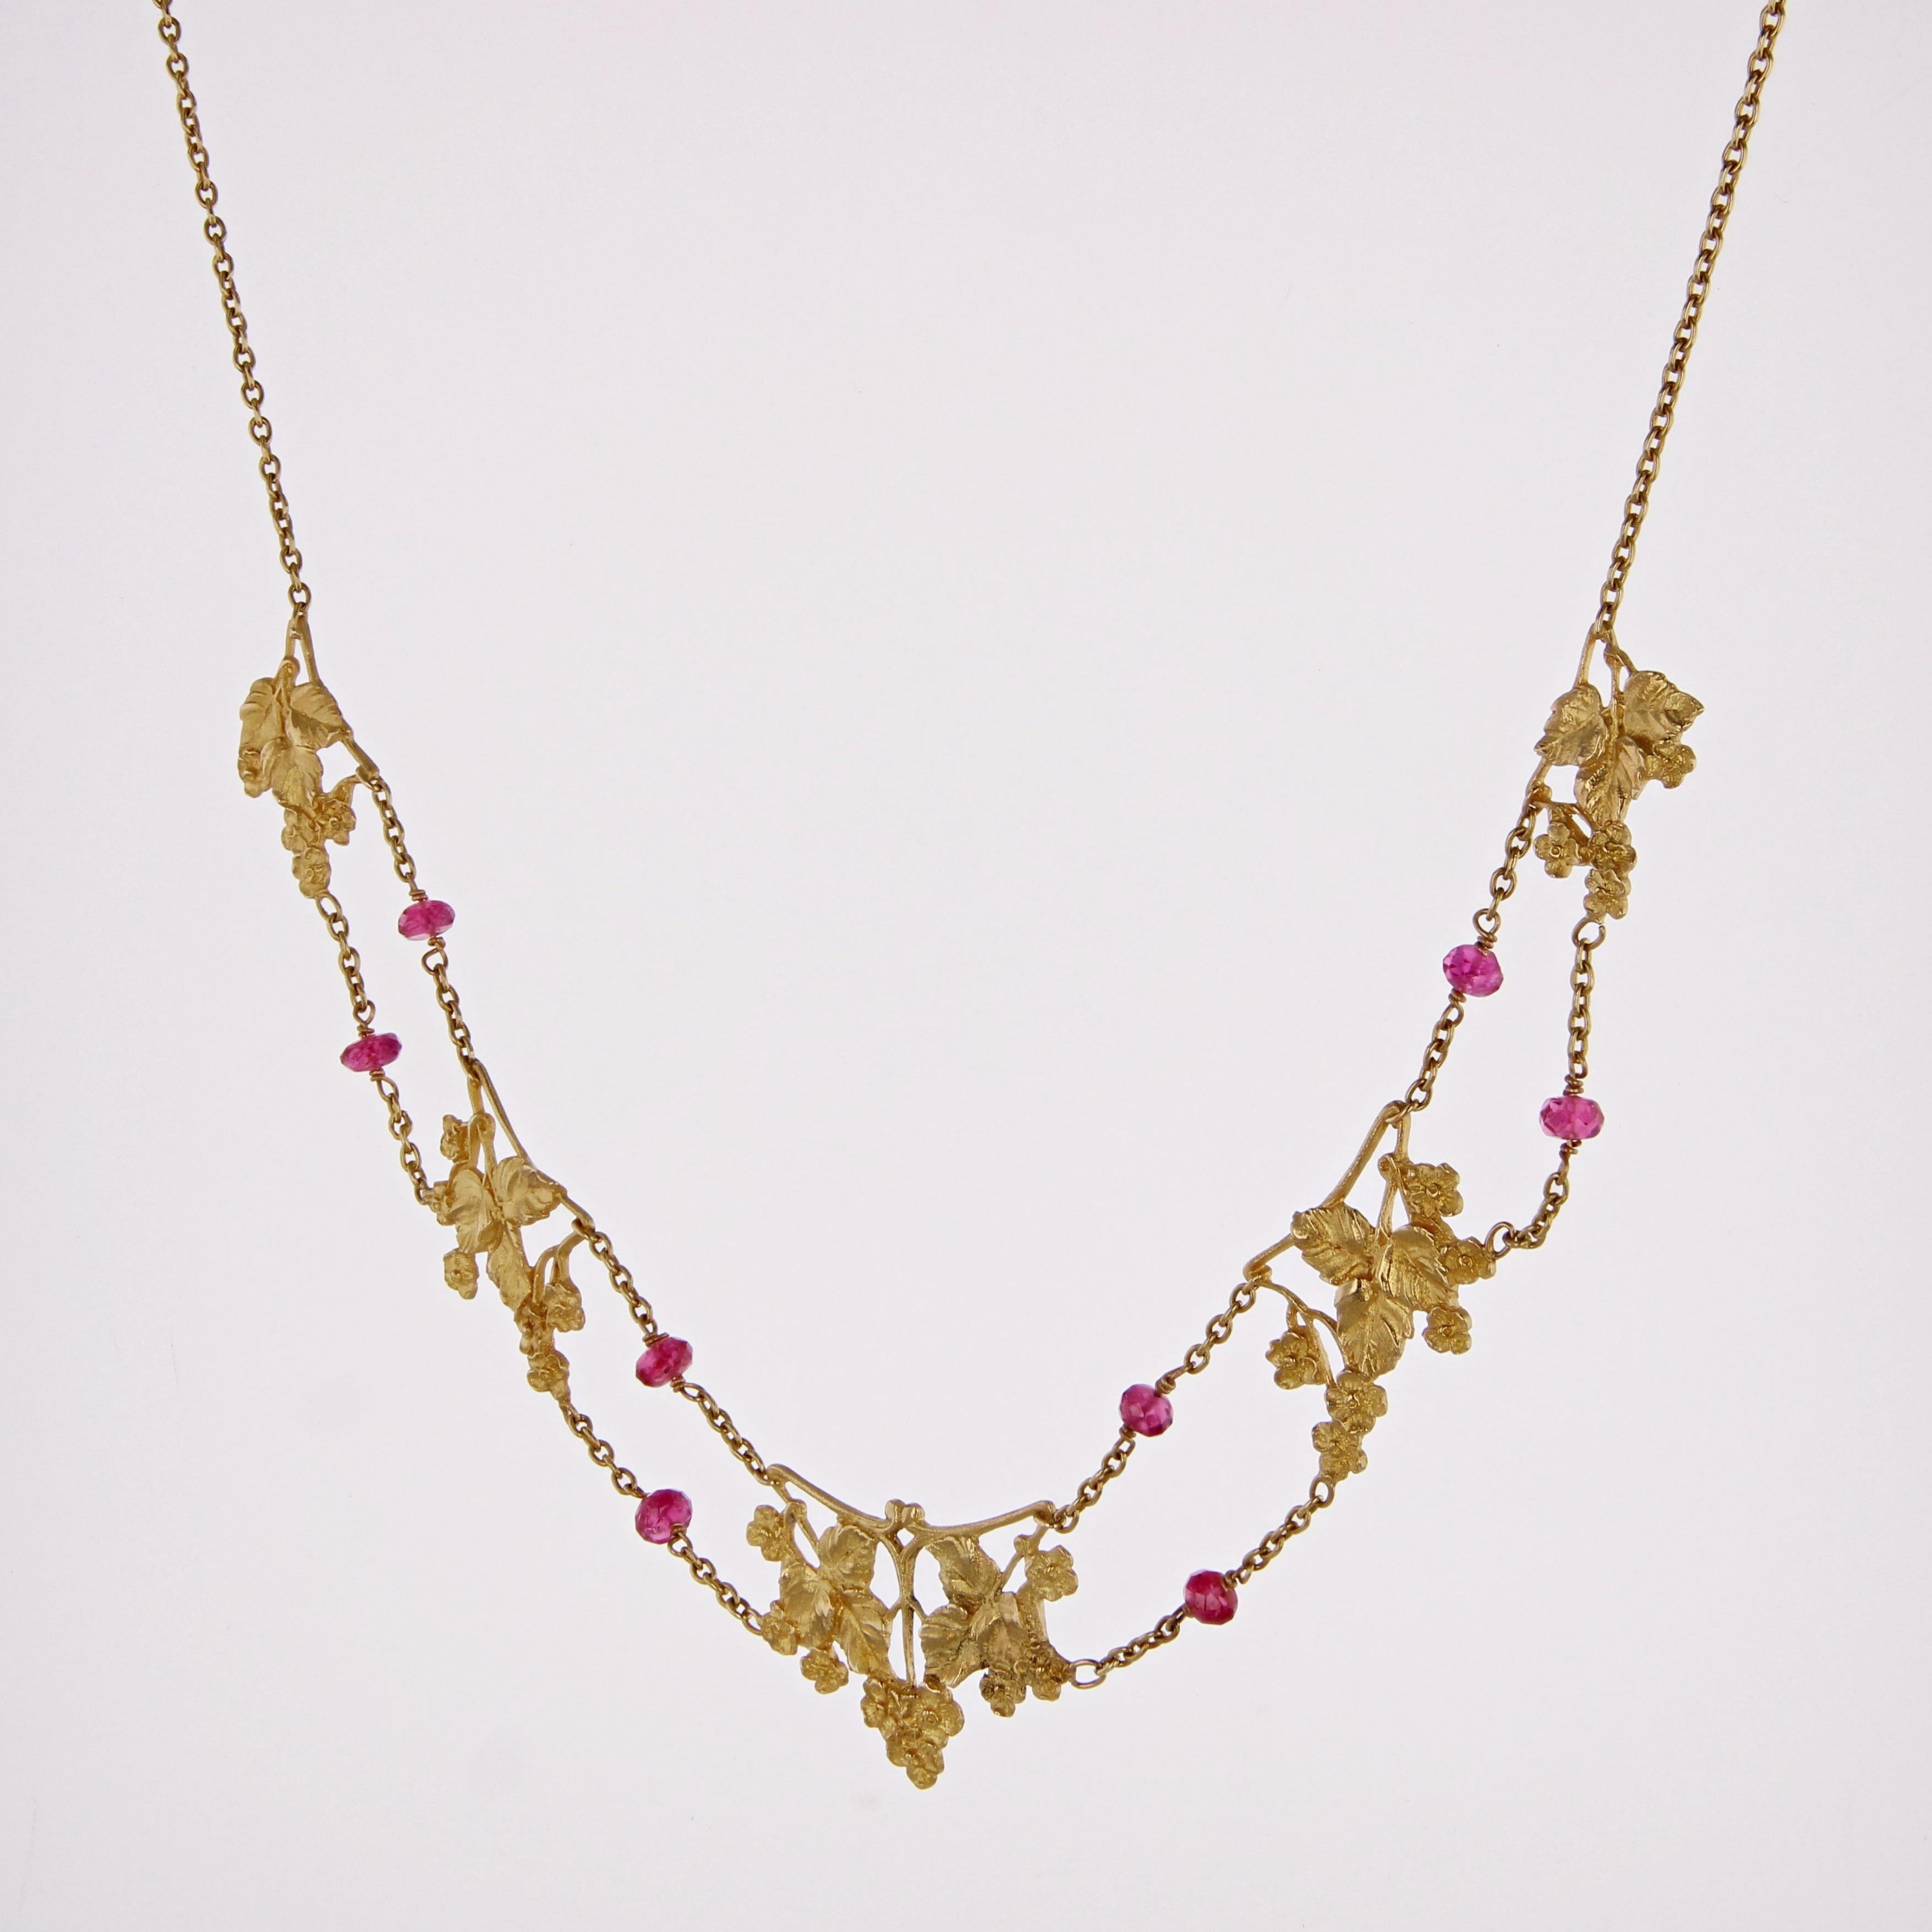 Belle Époque French 1950s 18 Carat Yellow Gold Pink Spinel Beads Drapery Necklace For Sale